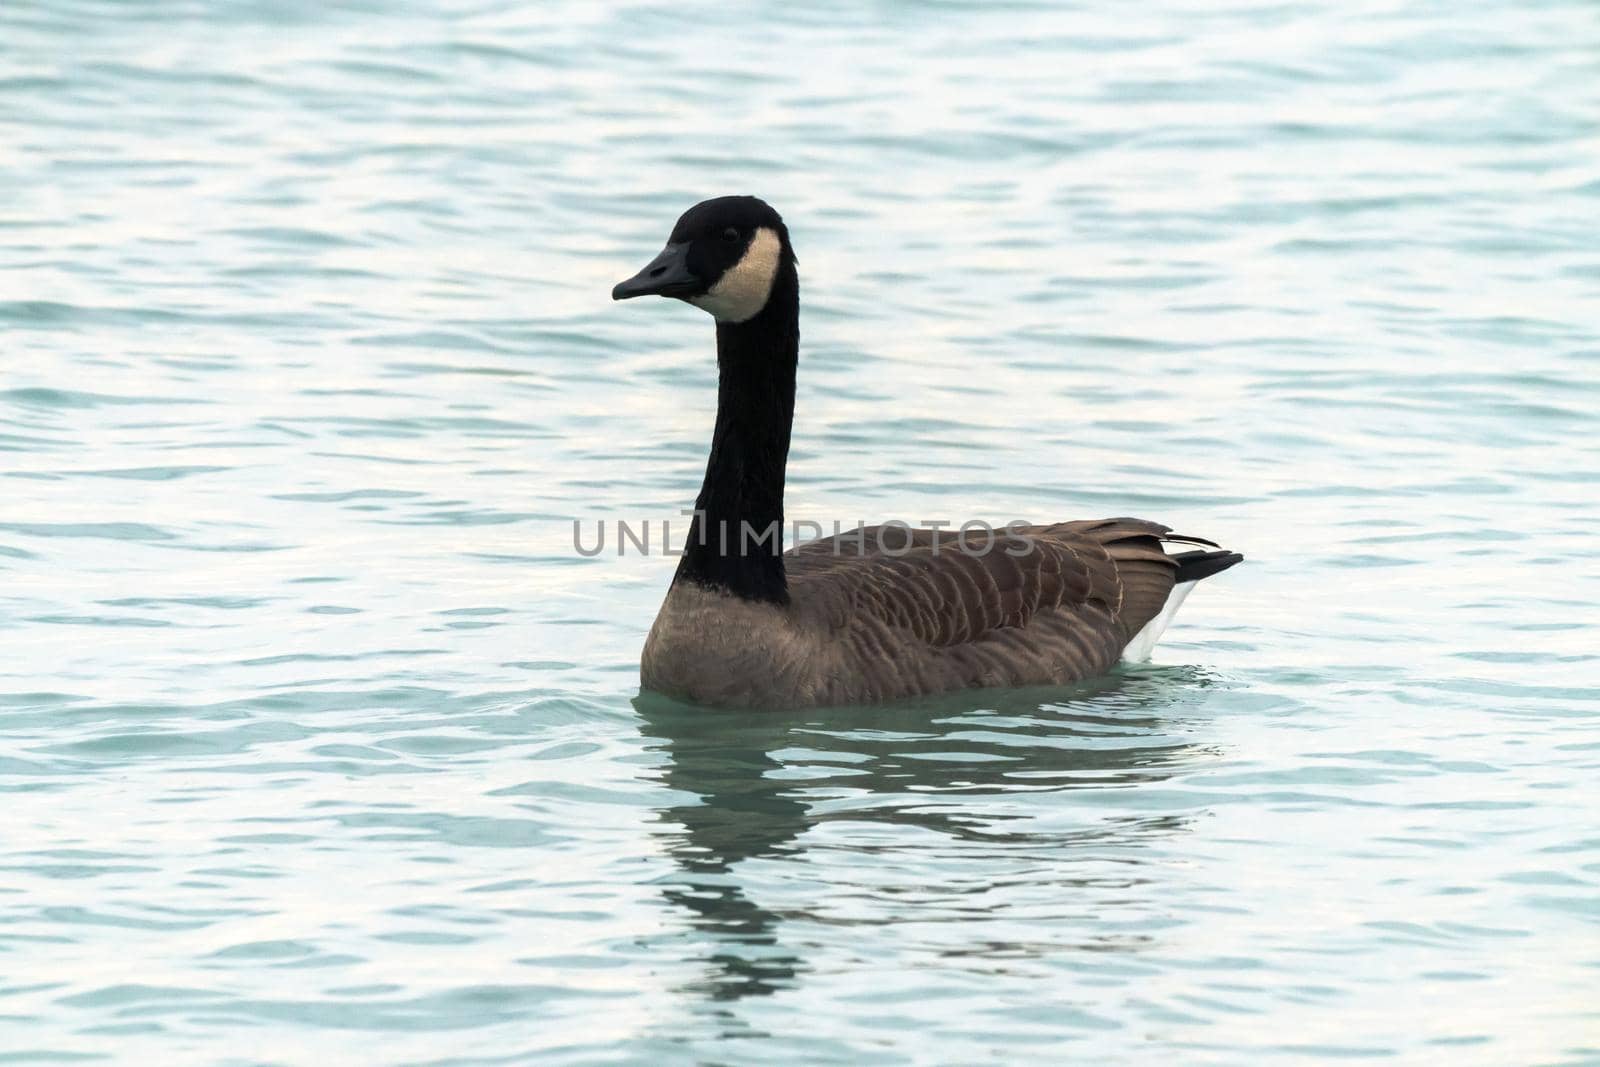 A single Canadian goose floats or swims on the blue water of Lake Michigan in Chicago. by lapse_life